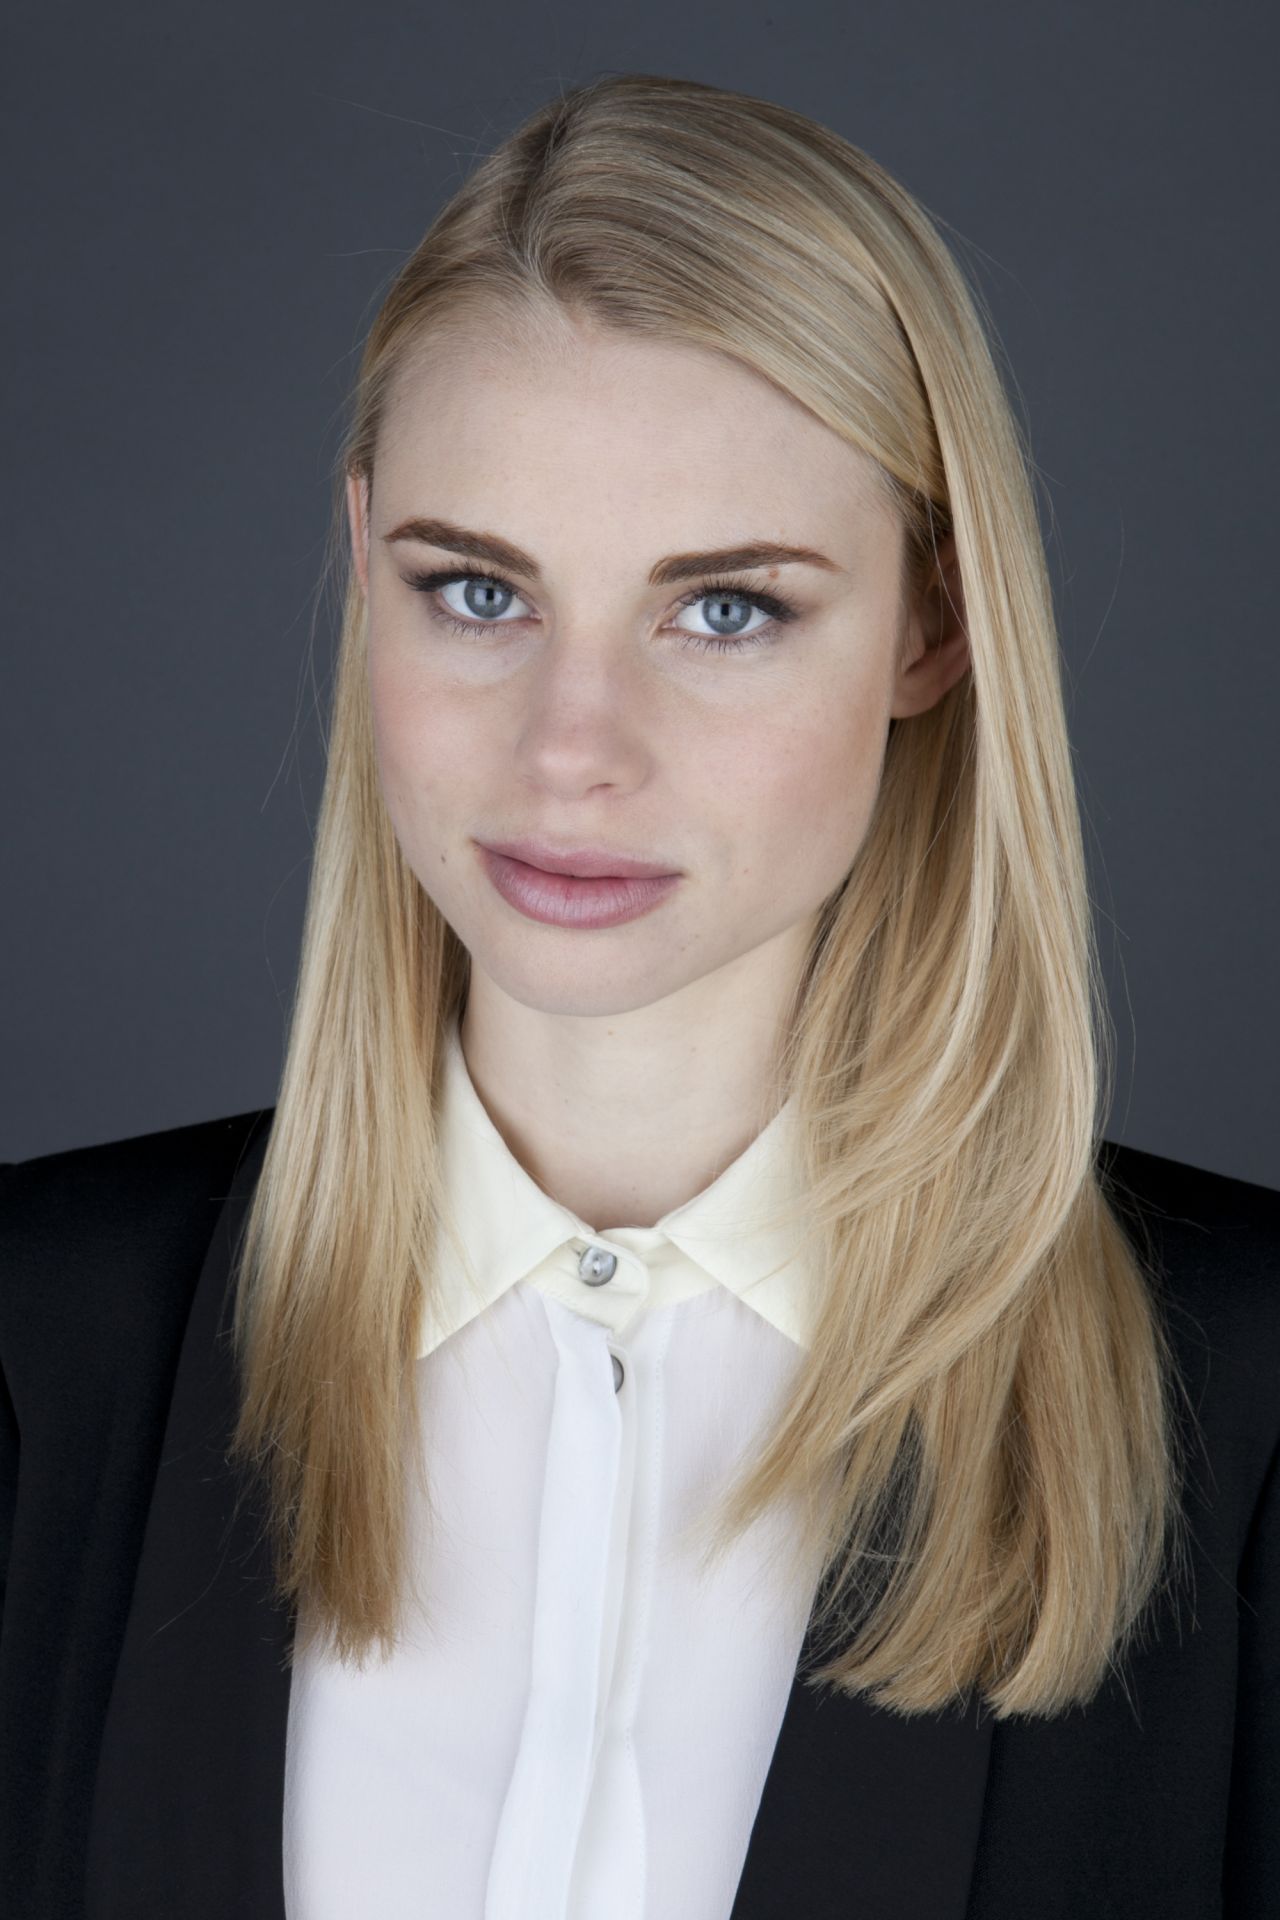 VAMPIRE ACADEMY Cast Portraits - Lucy Fry, Zoey Deutch and ...